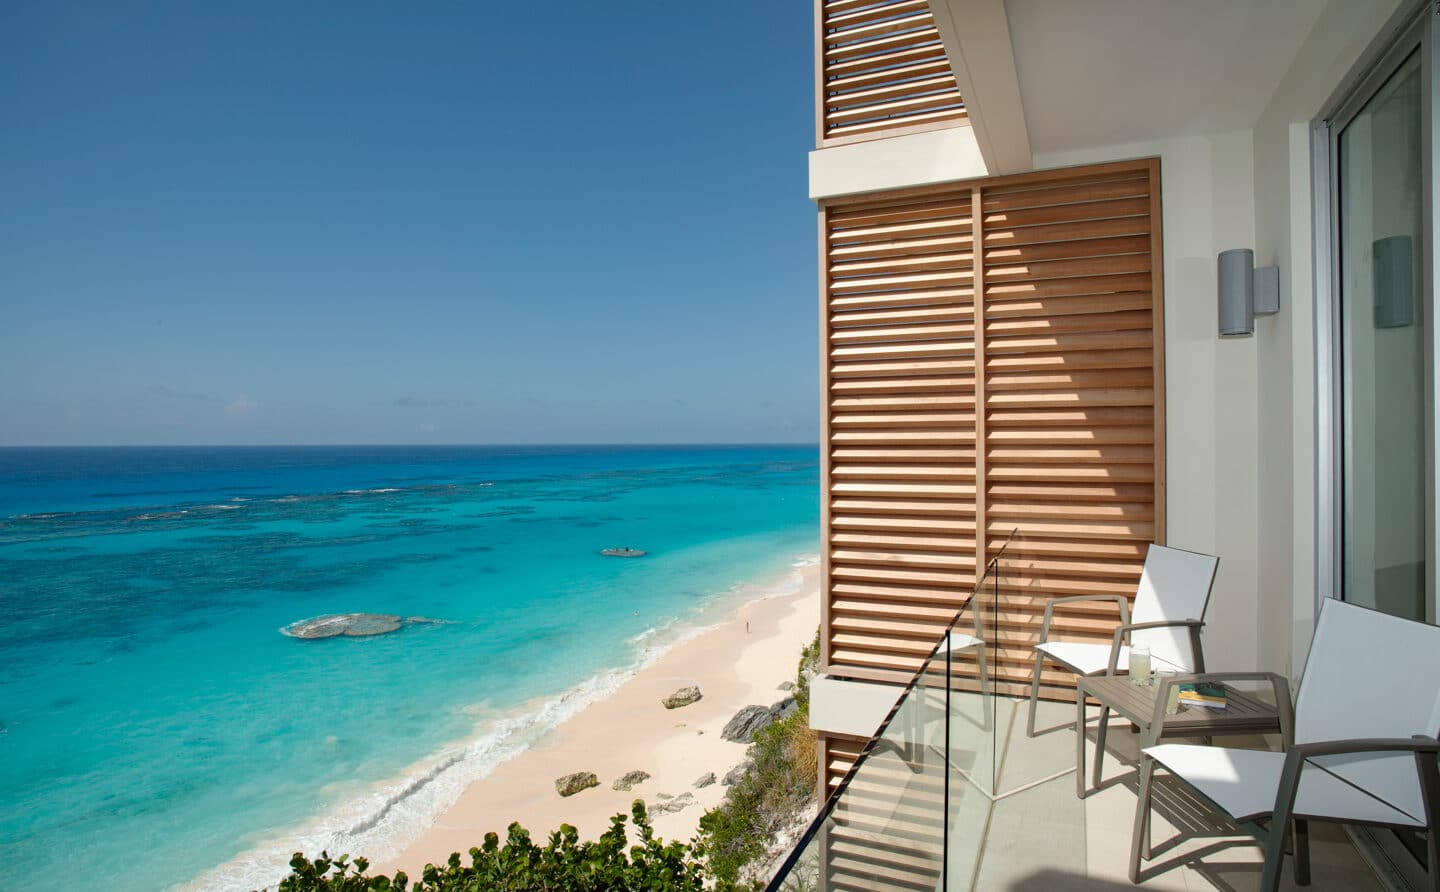 A balcony with two chairs overlooking a beach.